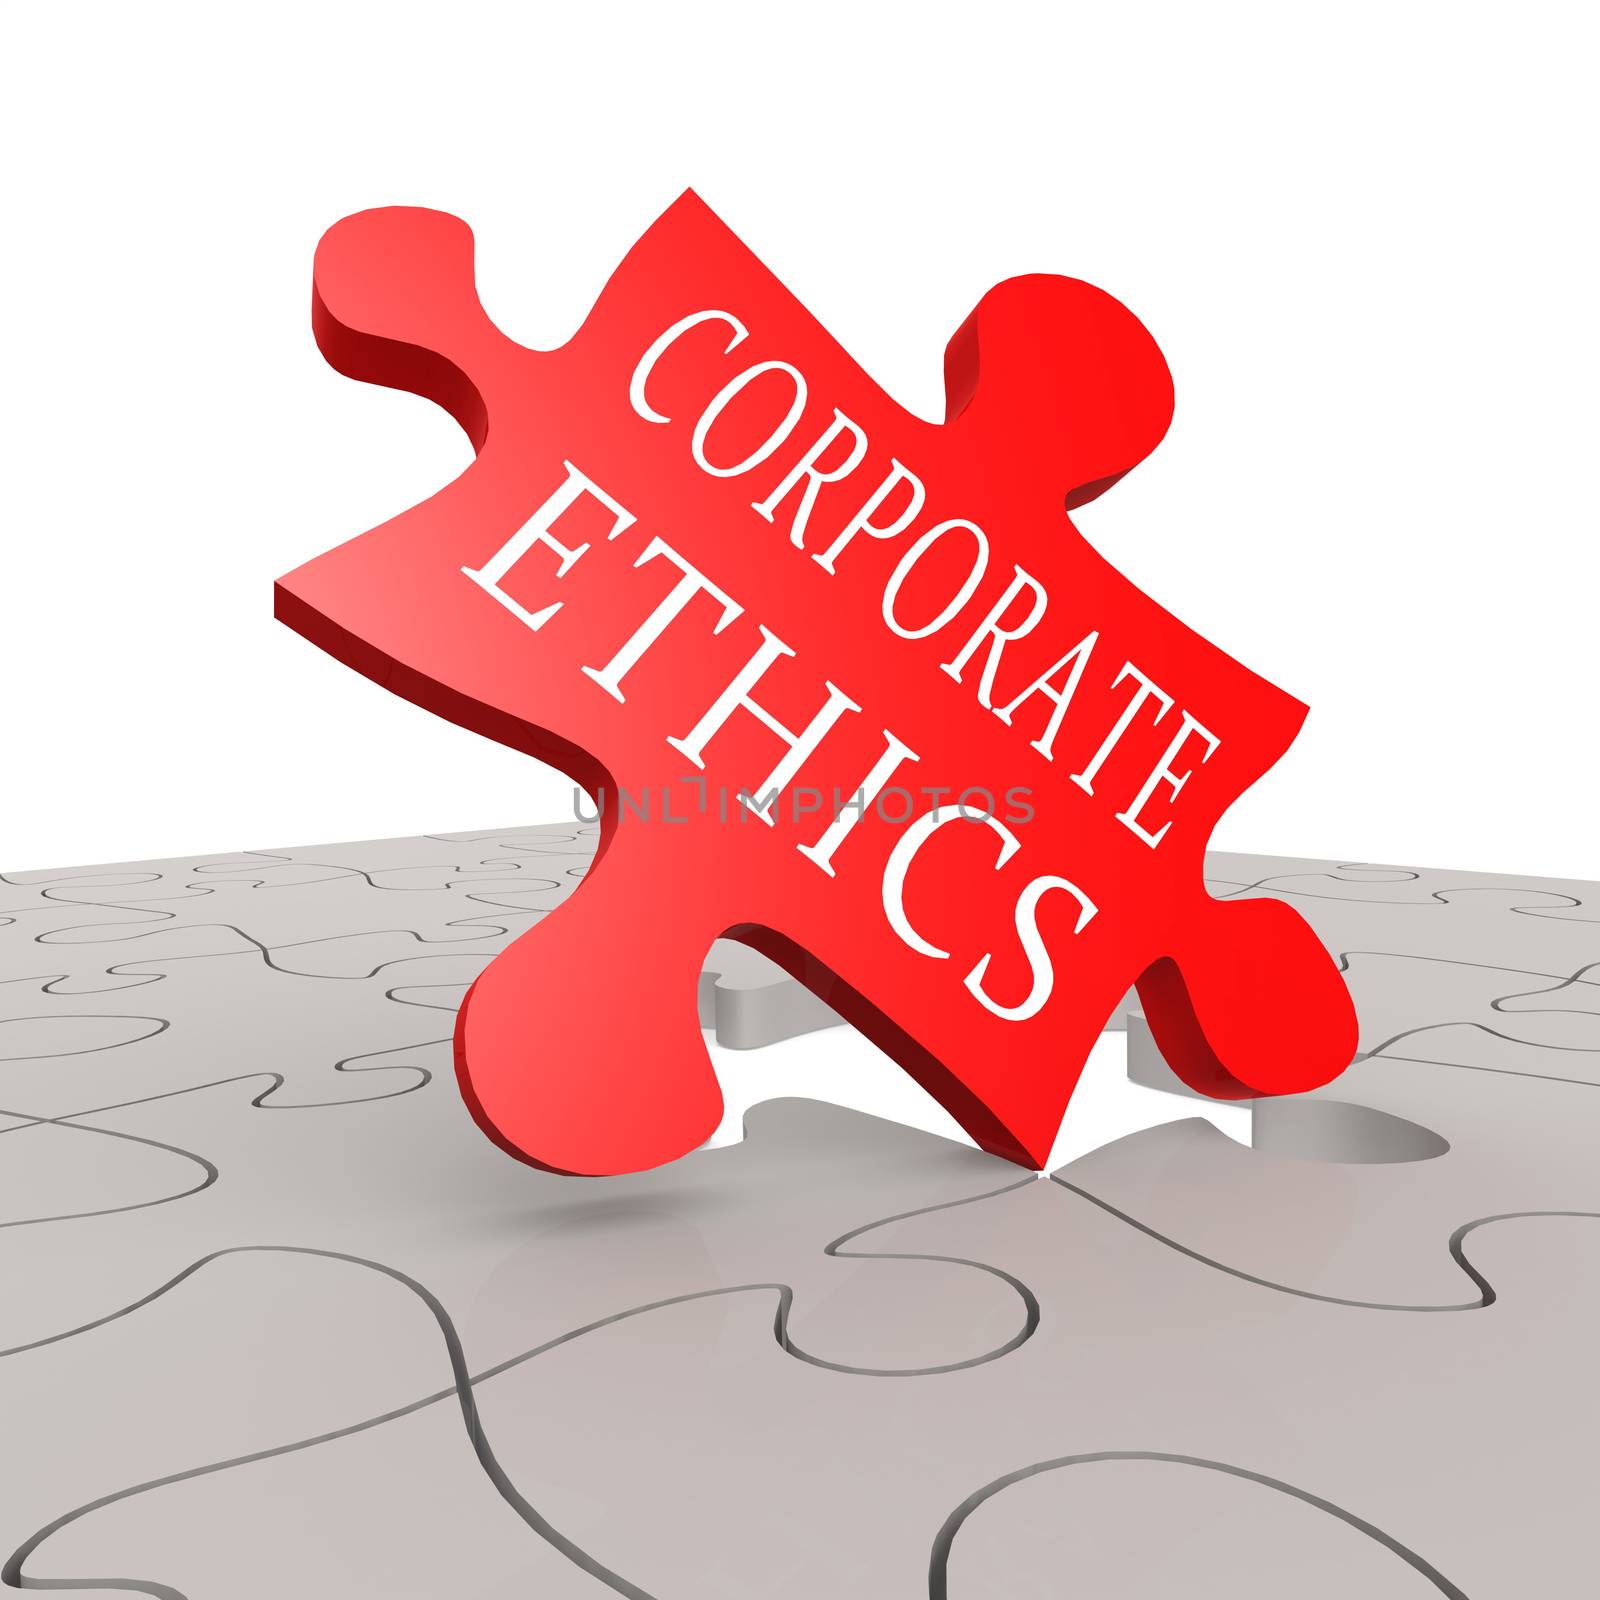 Corporate ethics puzzle by tang90246